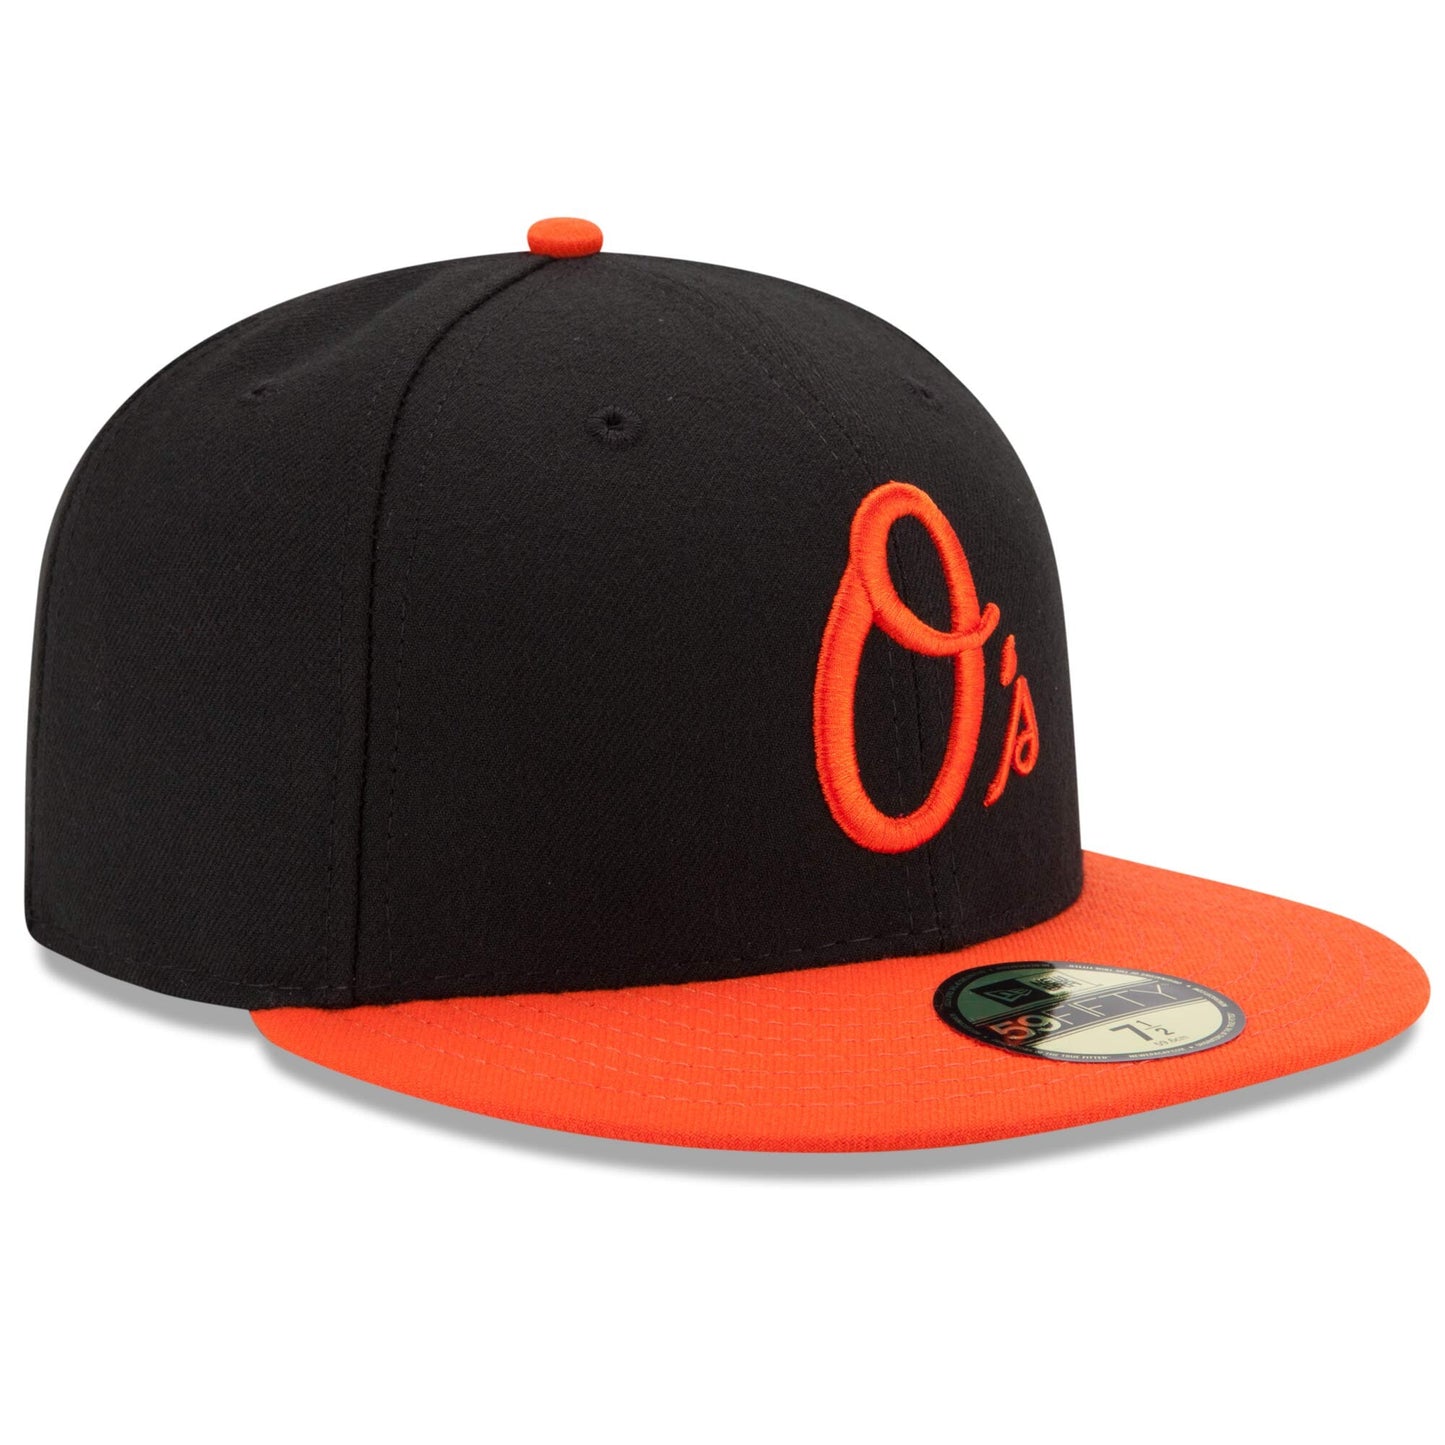 Men's Baltimore Orioles New Era Black/Orange Alternate Authentic Collection On Field 59FIFTY Performance Fitted Hat